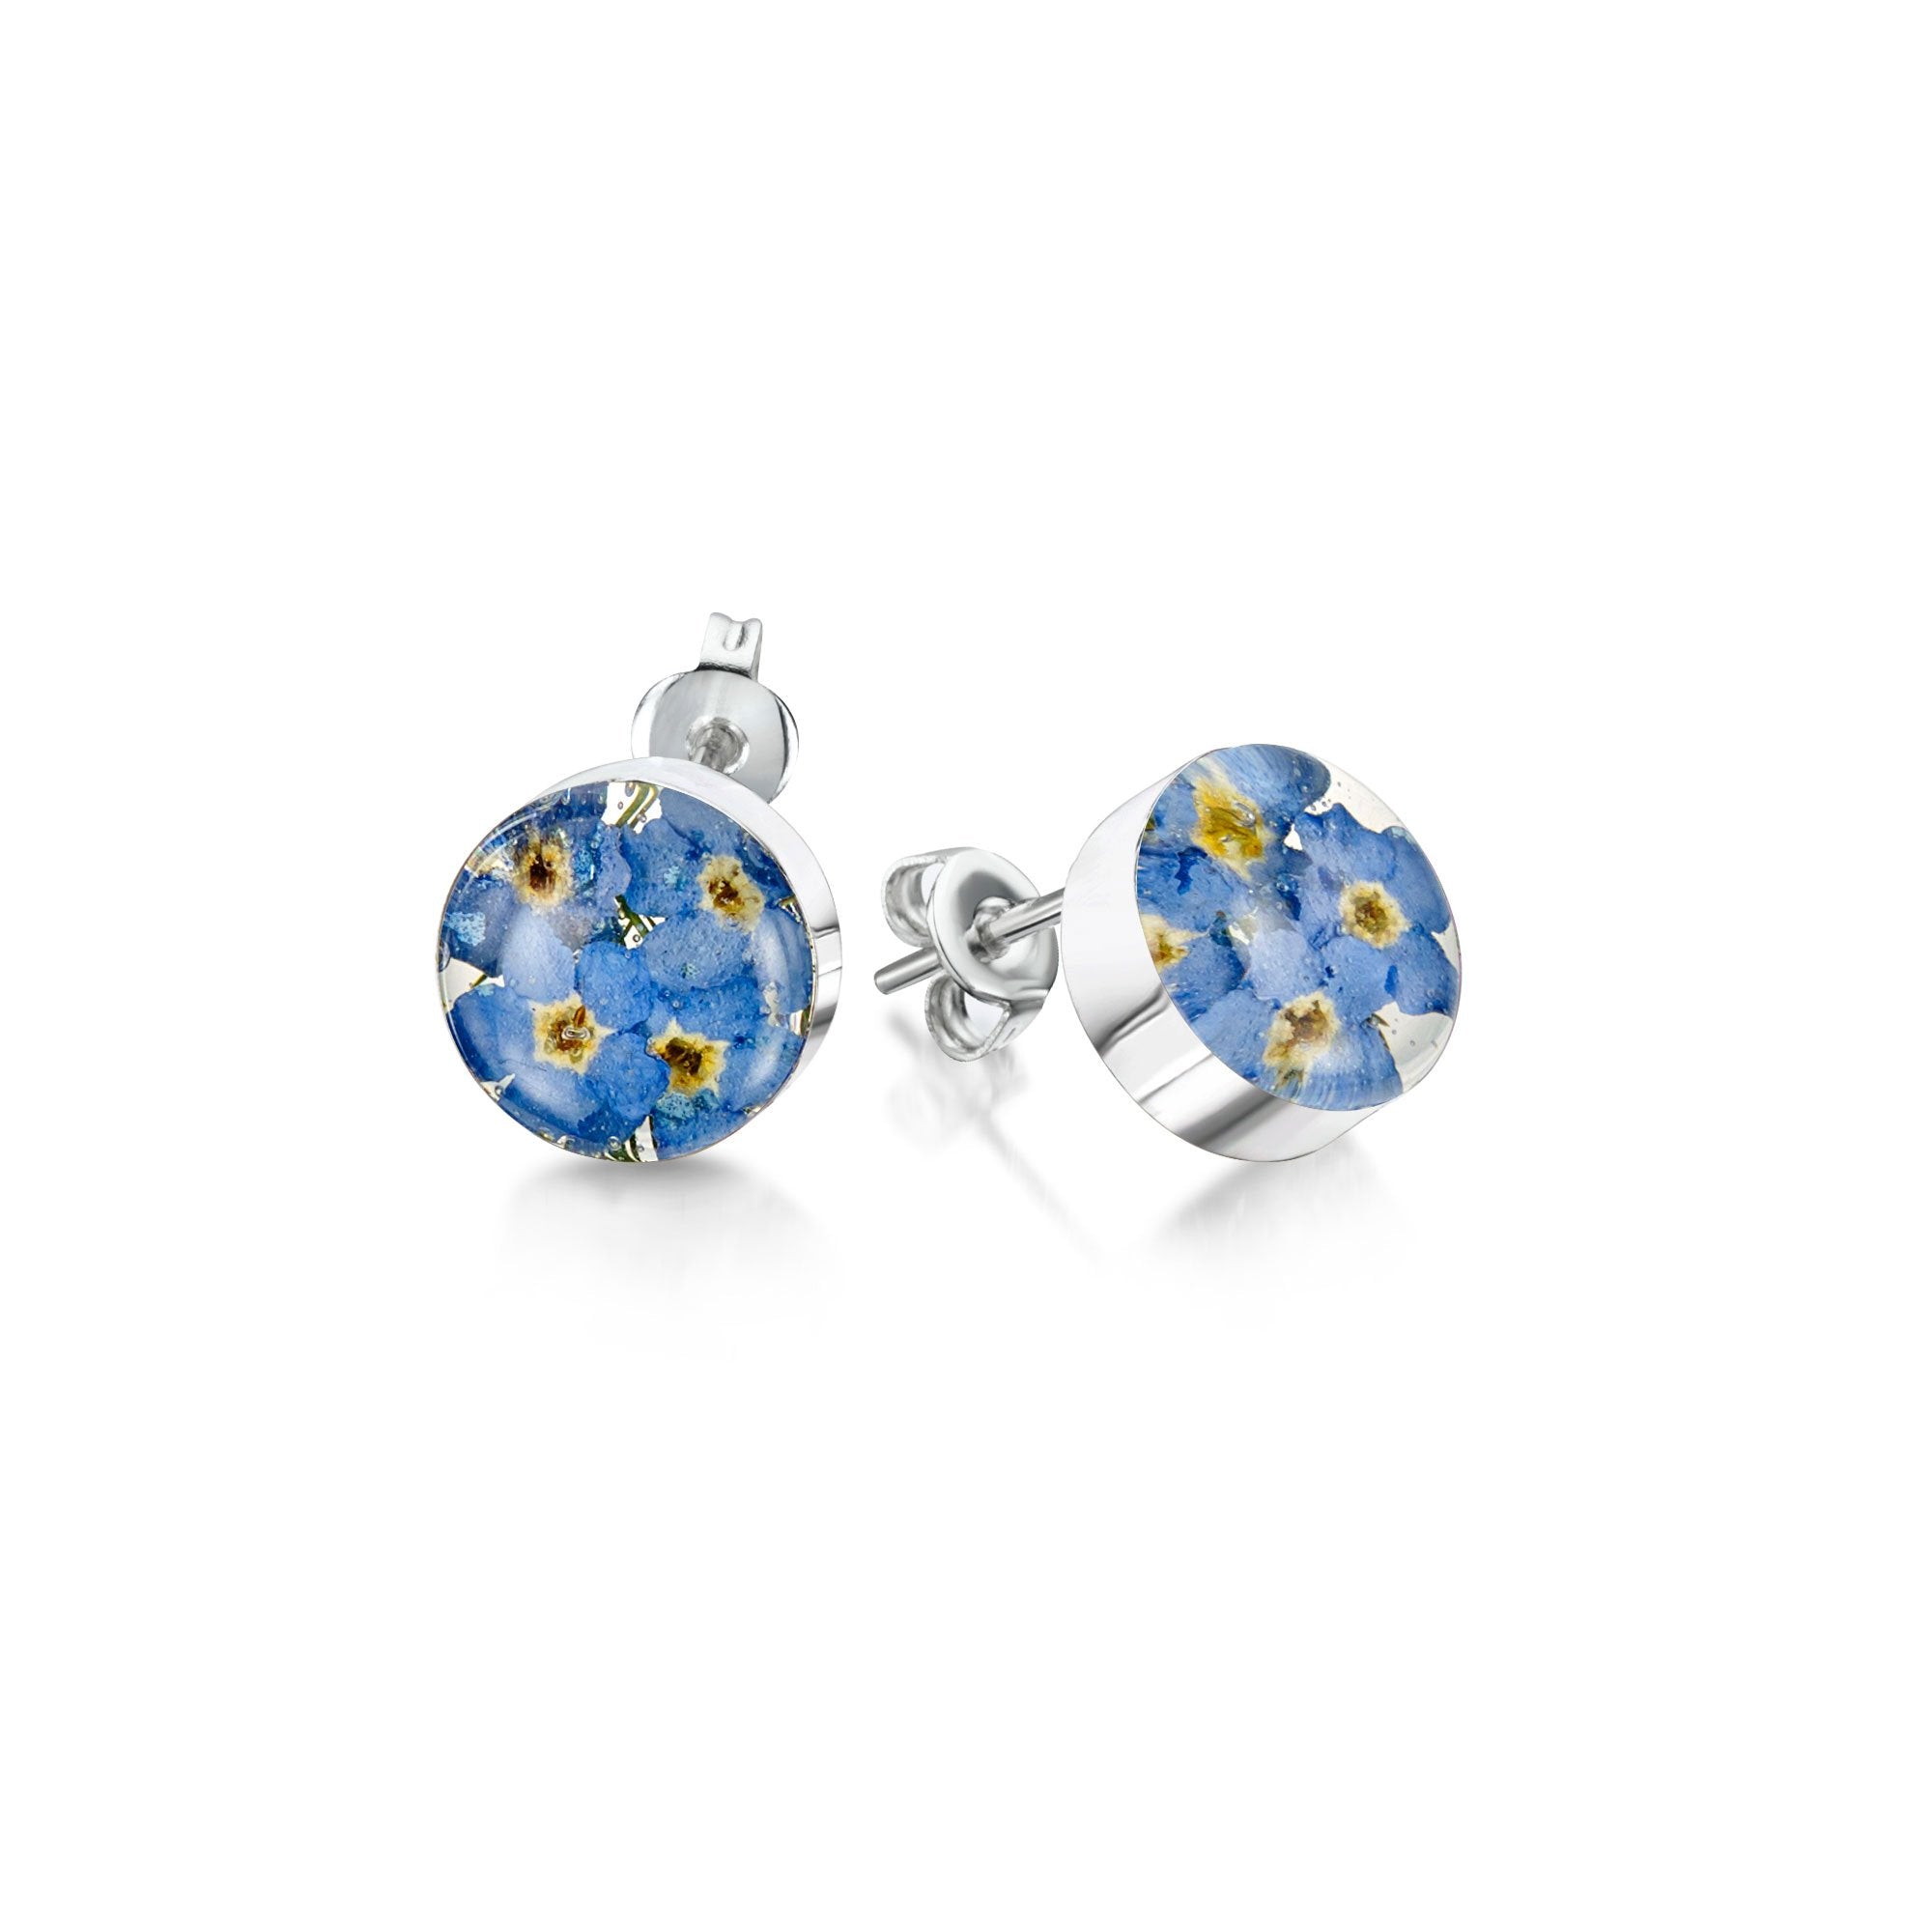 Shrieking Violet - Forget Me Not Collection - Round Stud Earrings